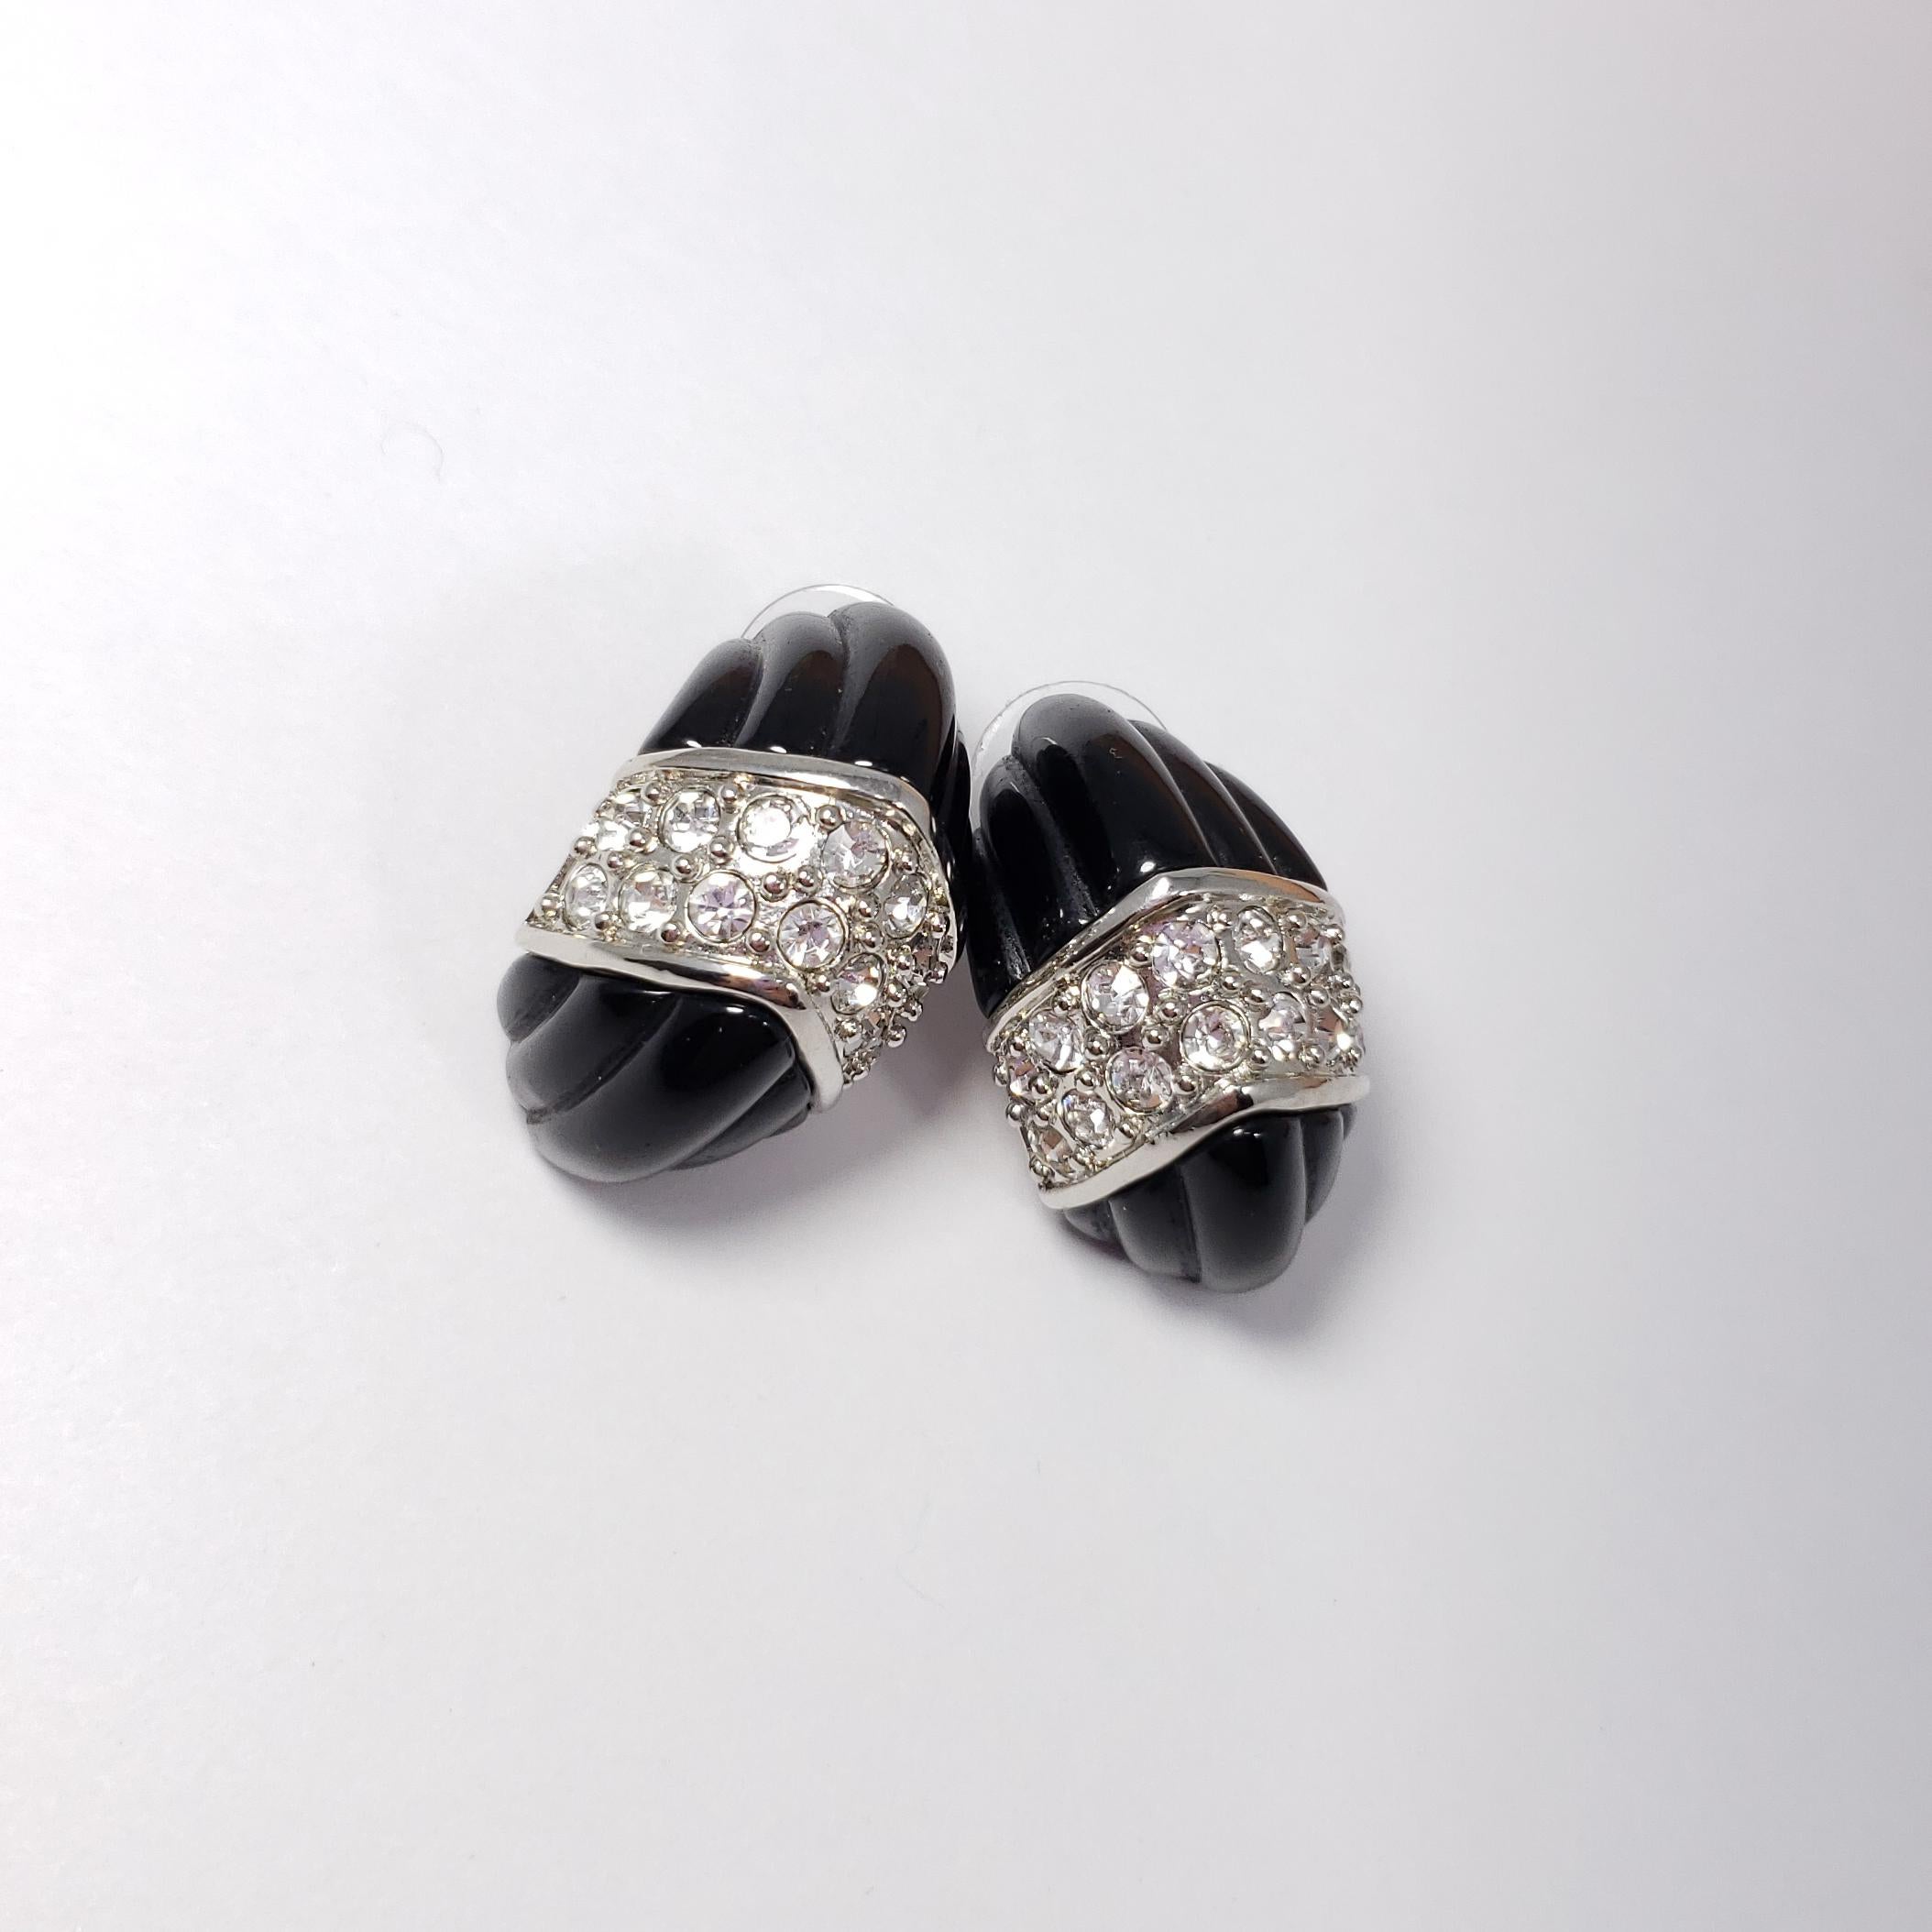 A pair of post-back earrings by Kenneth Jay Lane. Each carved black earrings is decorated with clear pave crystals set in a silvertone setting.

Hallmarks: KJL, China